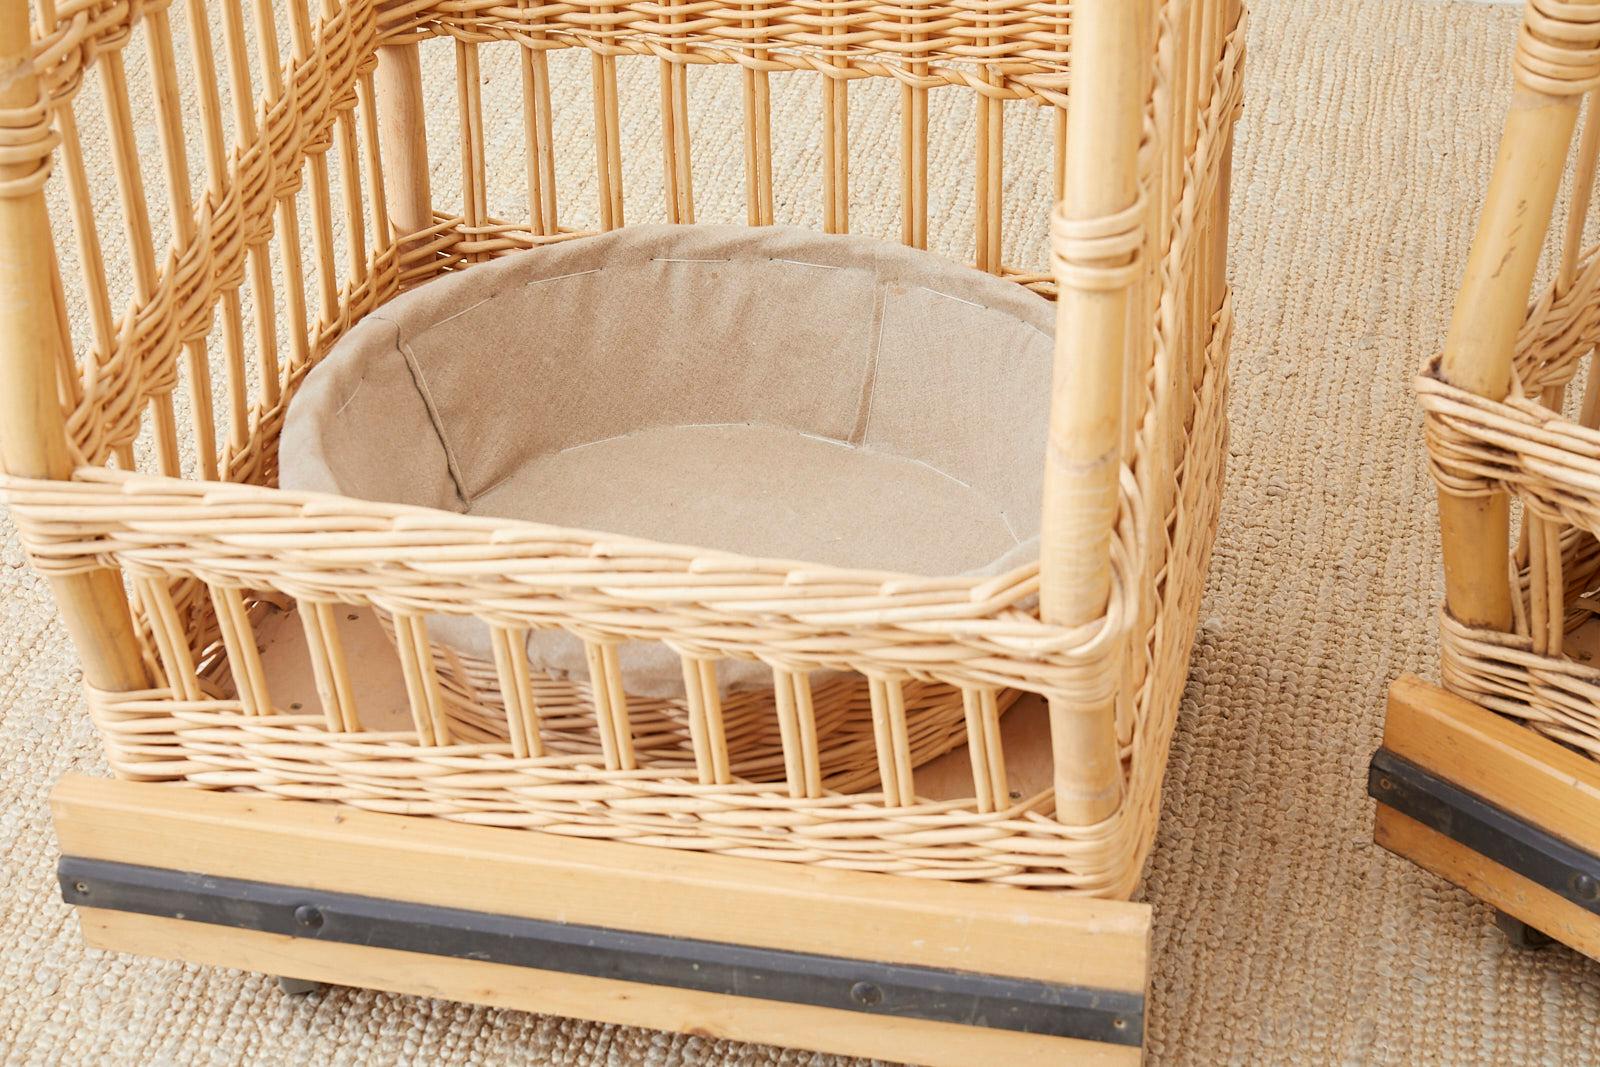 Rolling pair or boulangerie bread display bins or baskets featuring woven wicker over a rattan frame. The bins have a square form with three sides and an open front and top. They are mounted on wood with small casters. Each bin has a round removable